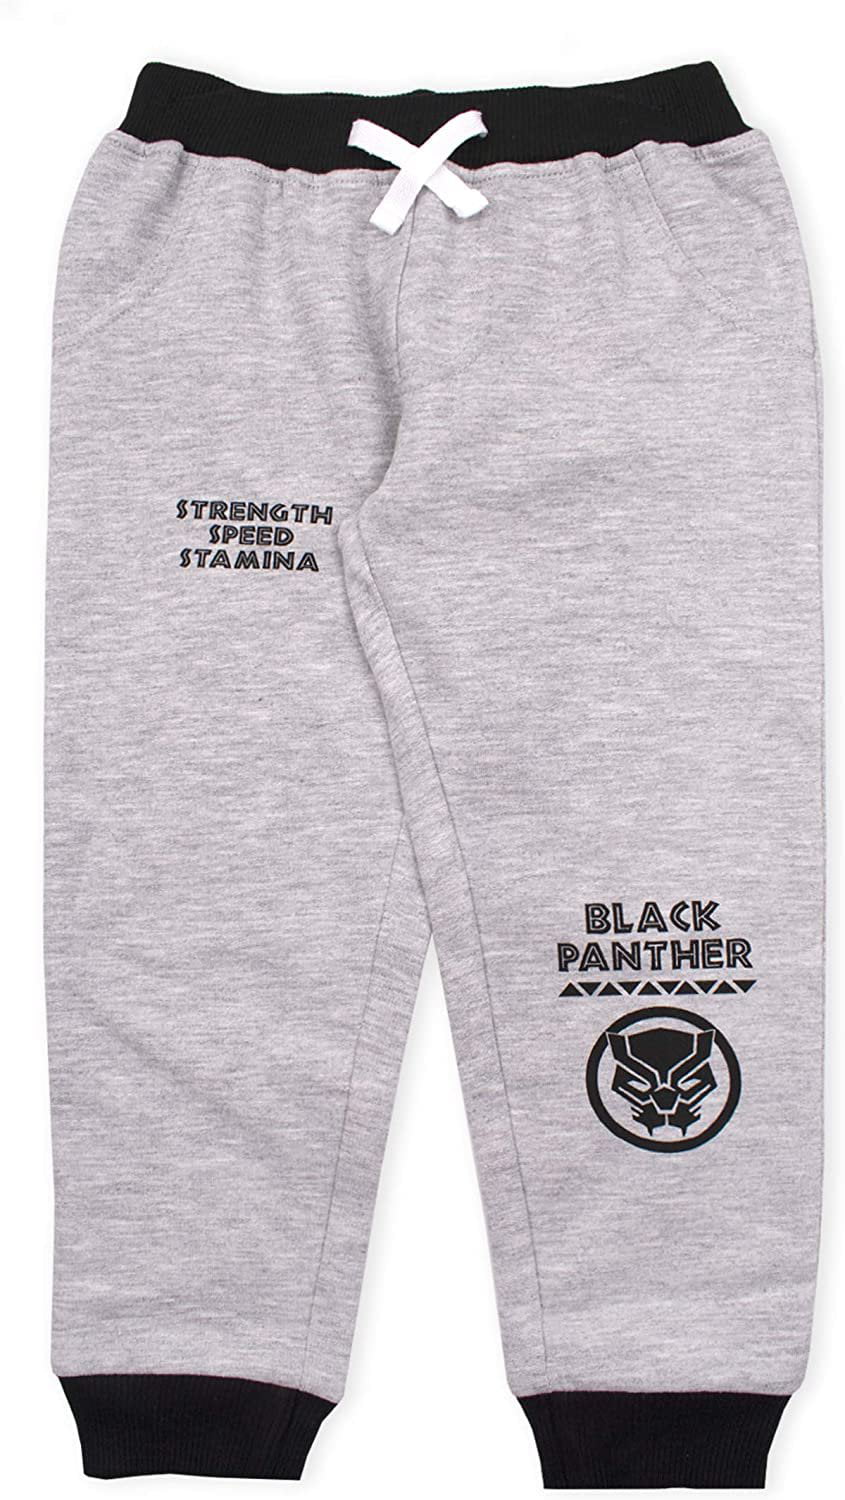 Marvel Clothes 2-Pack Black Panther or Spiderman Boys Joggers Pants 